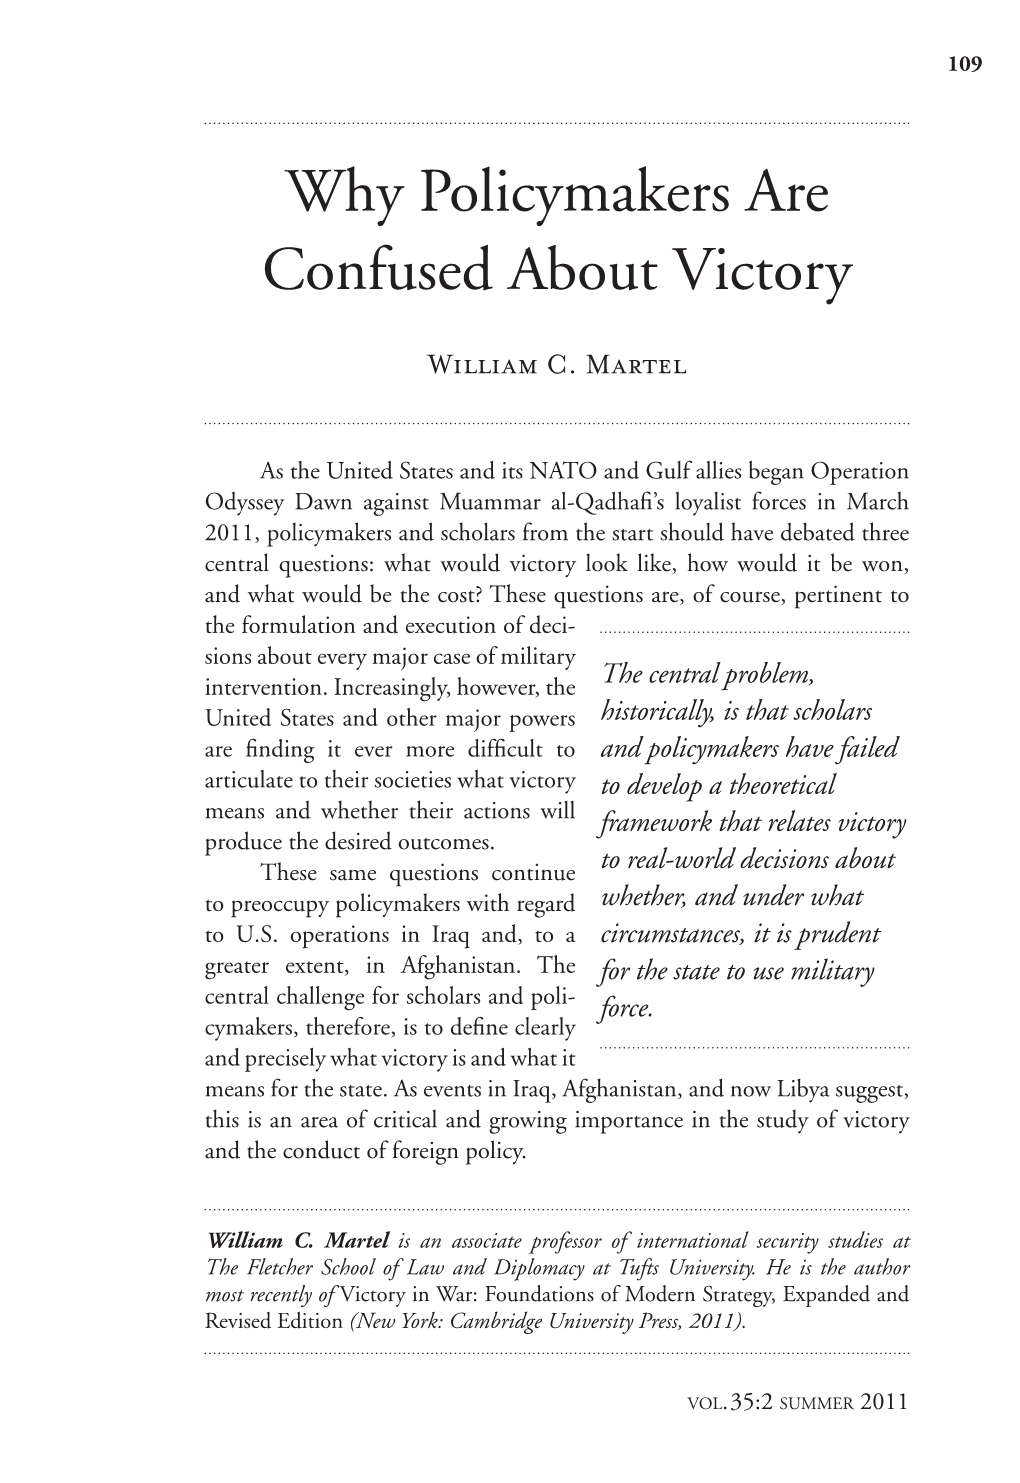 Why Policymakers Are Confused About Victory